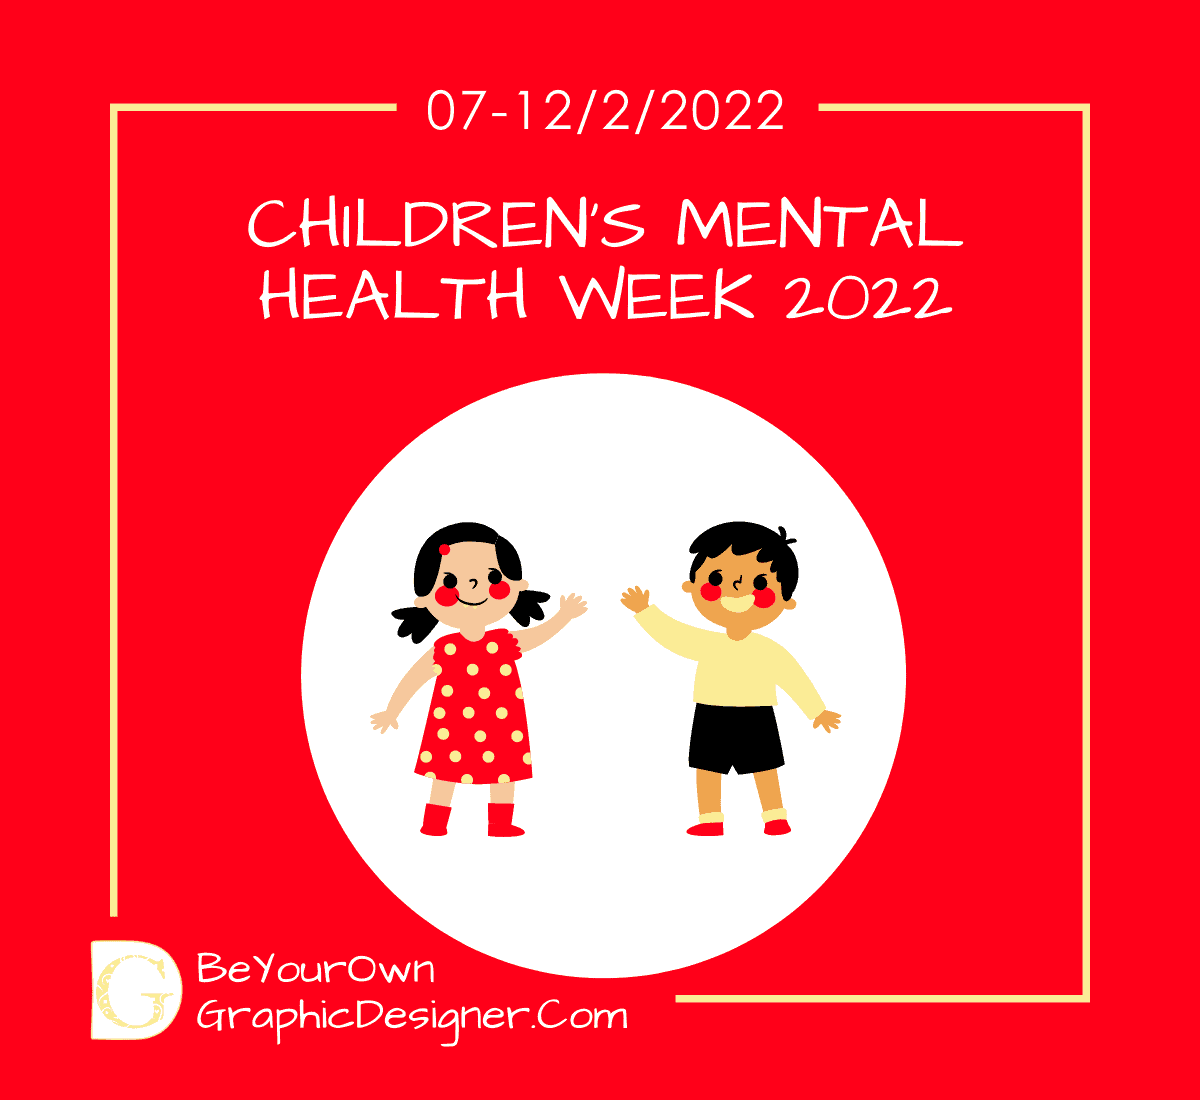 Children's Mental Health Week 20022, 100+ Content Ideas and Inspiration for February 2022